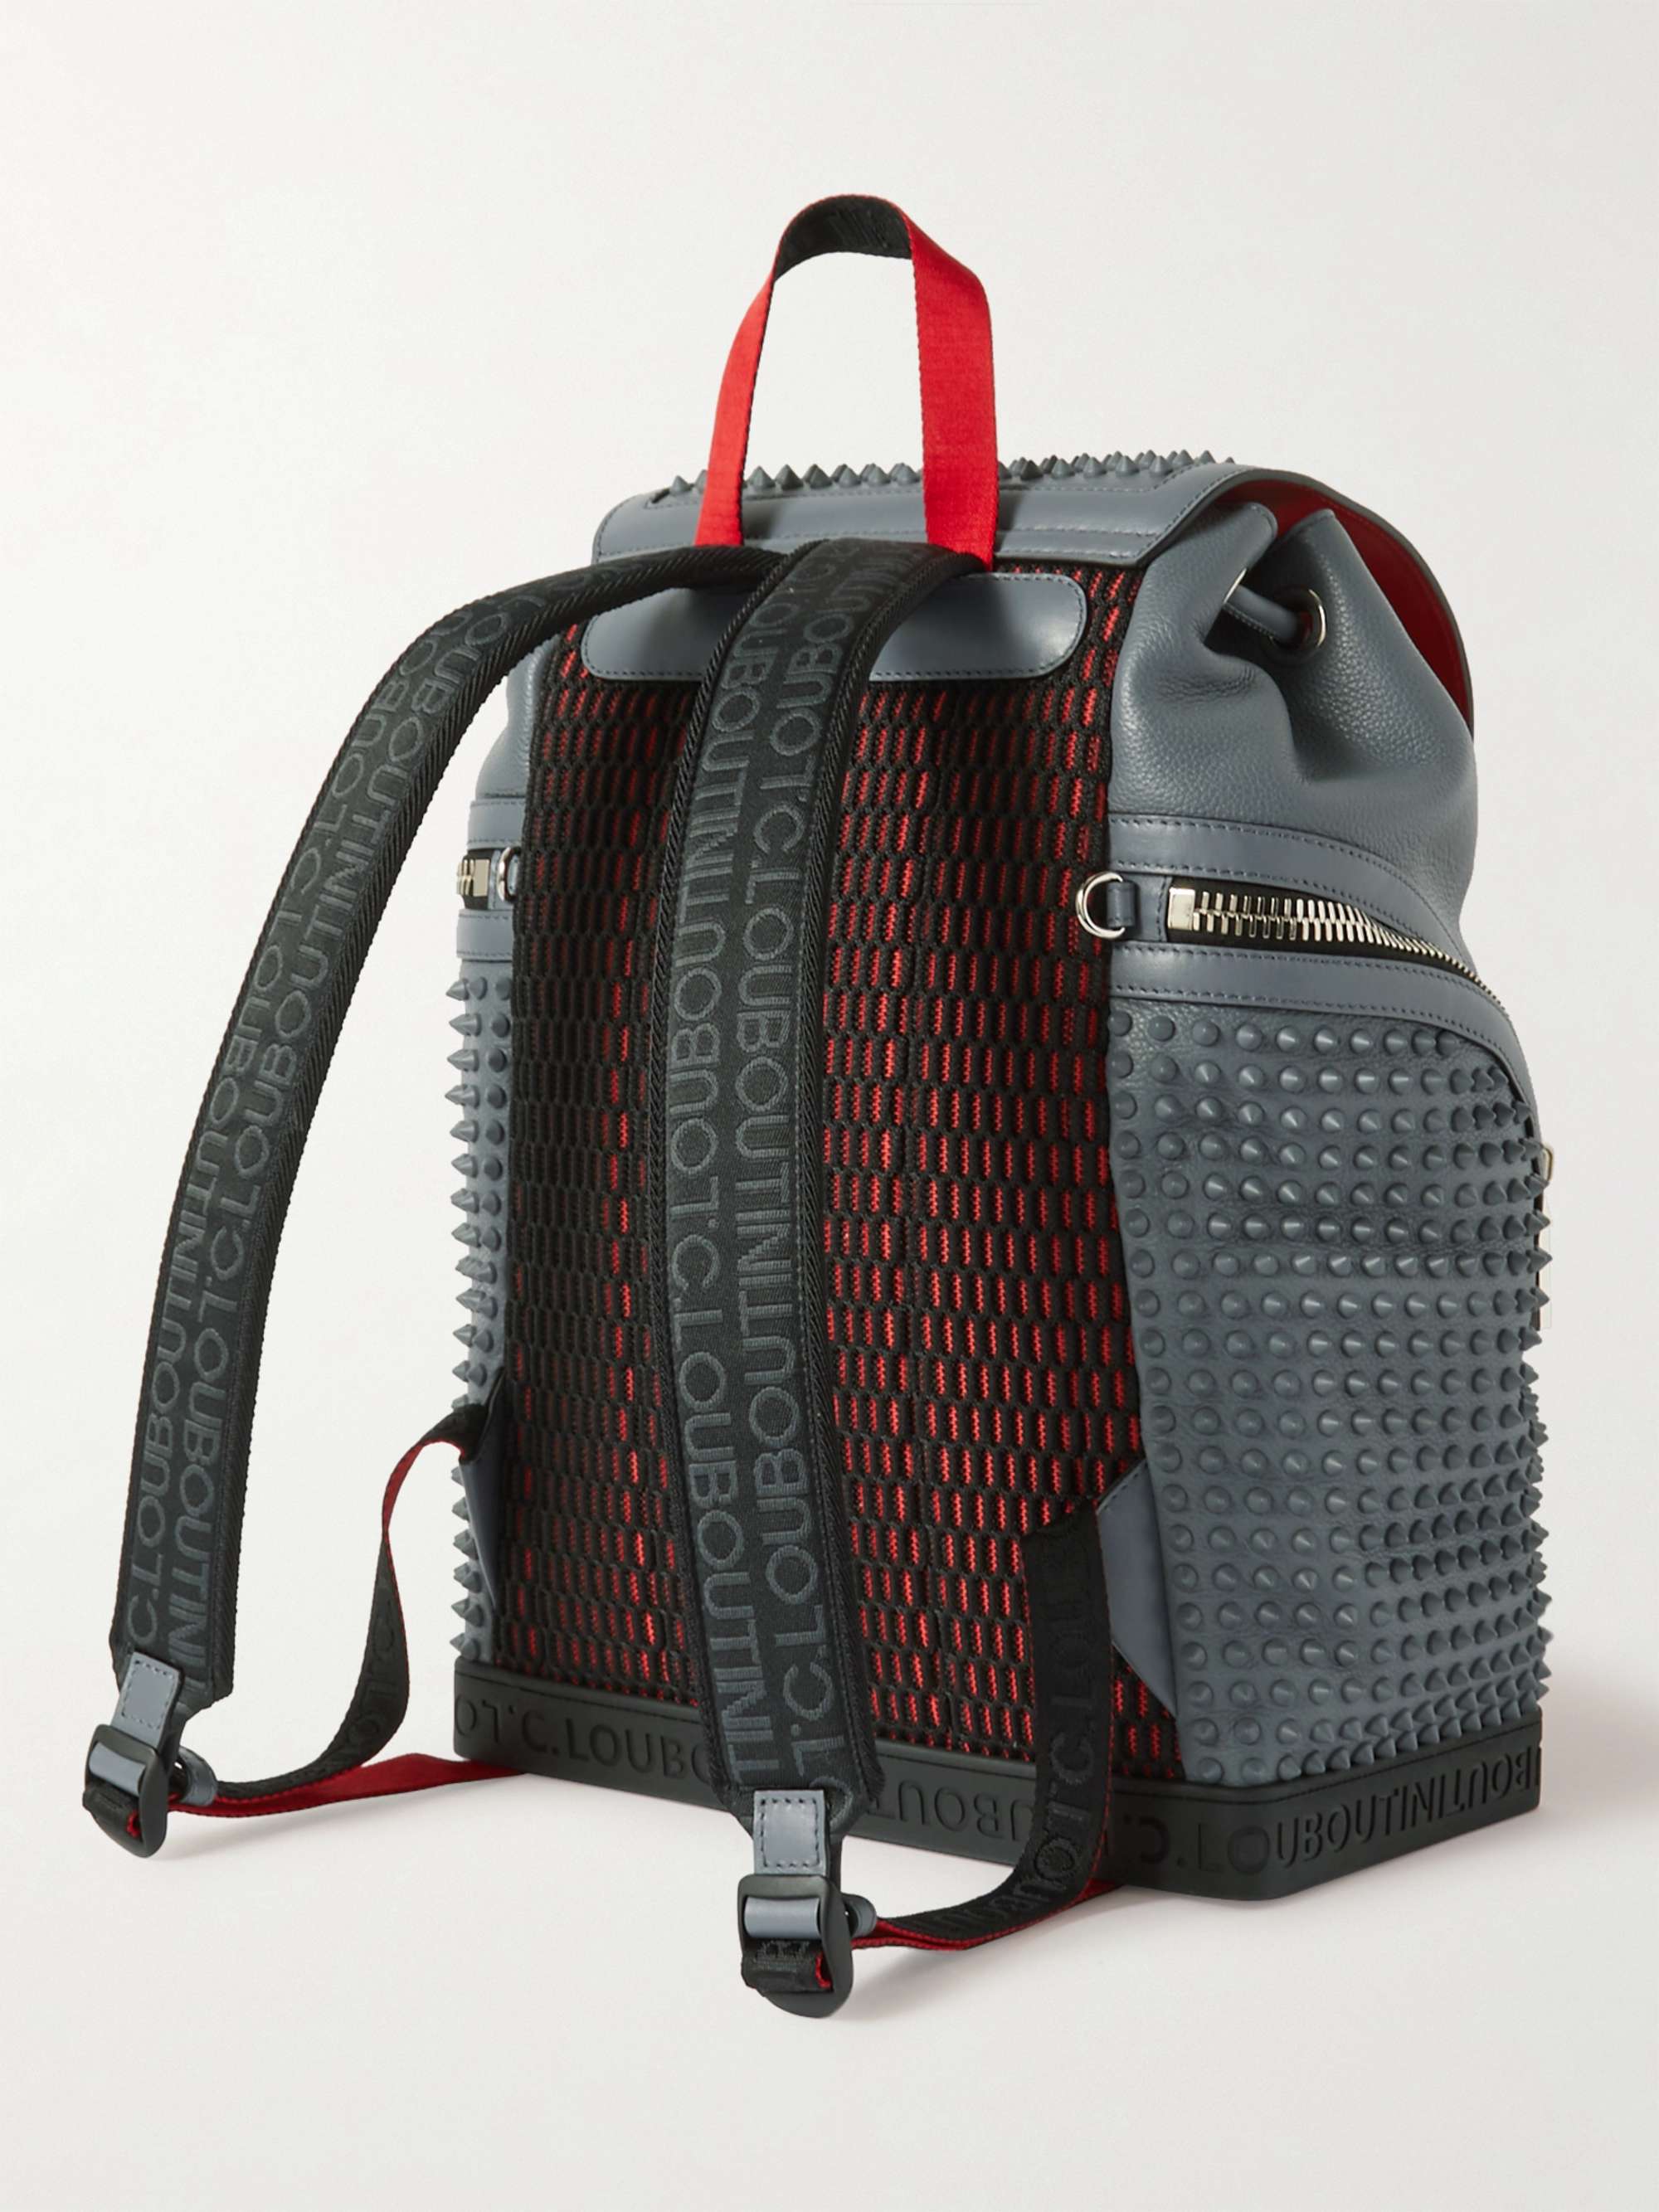 CHRISTIAN LOUBOUTIN Explorafunk Spiked Rubber-Trimmed Full-Grain Leather Backpack